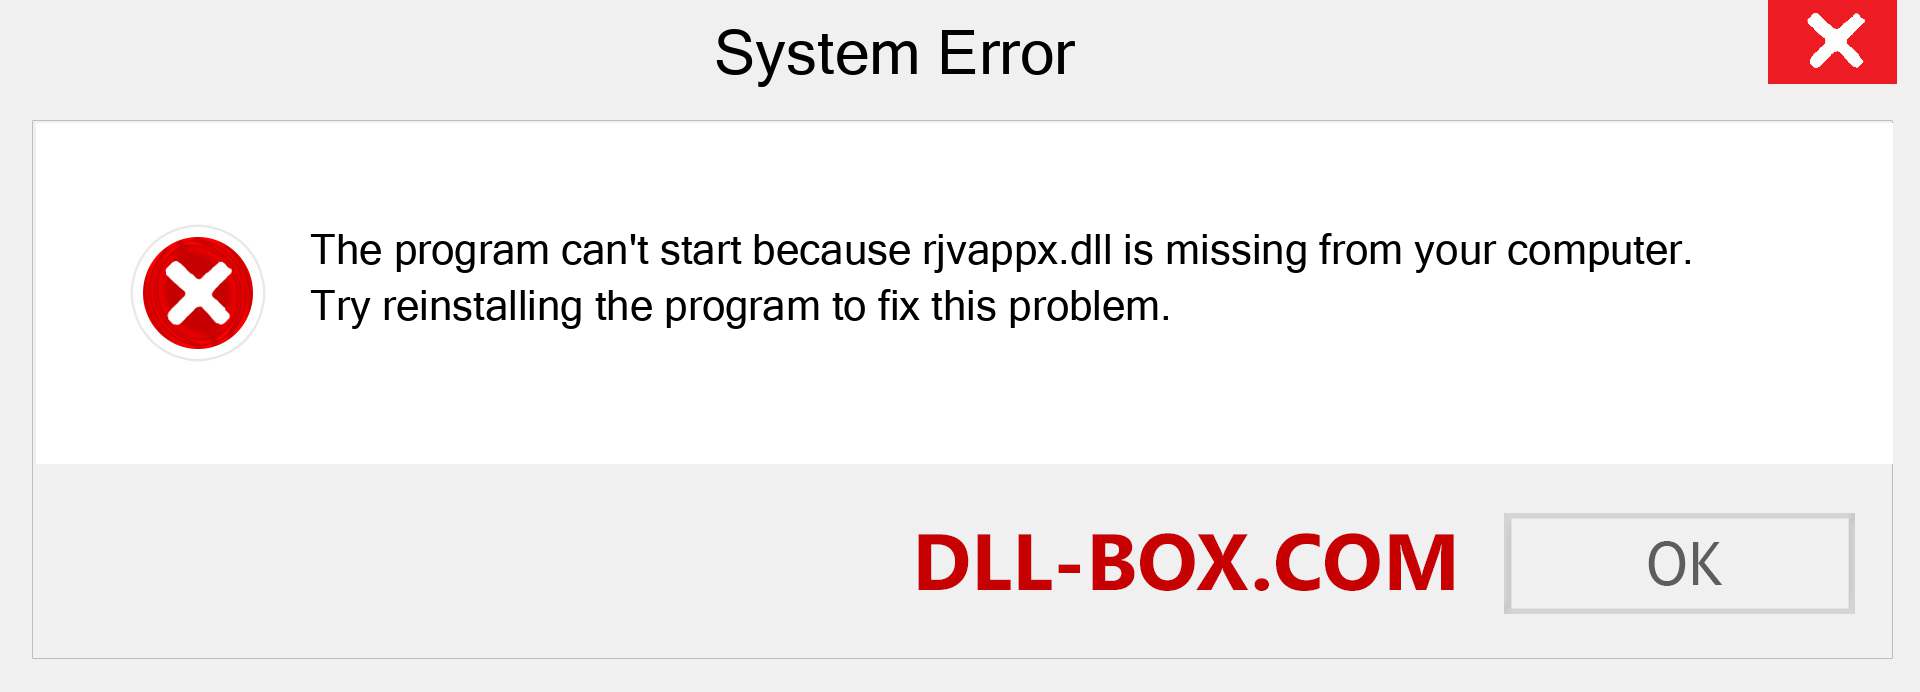  rjvappx.dll file is missing?. Download for Windows 7, 8, 10 - Fix  rjvappx dll Missing Error on Windows, photos, images